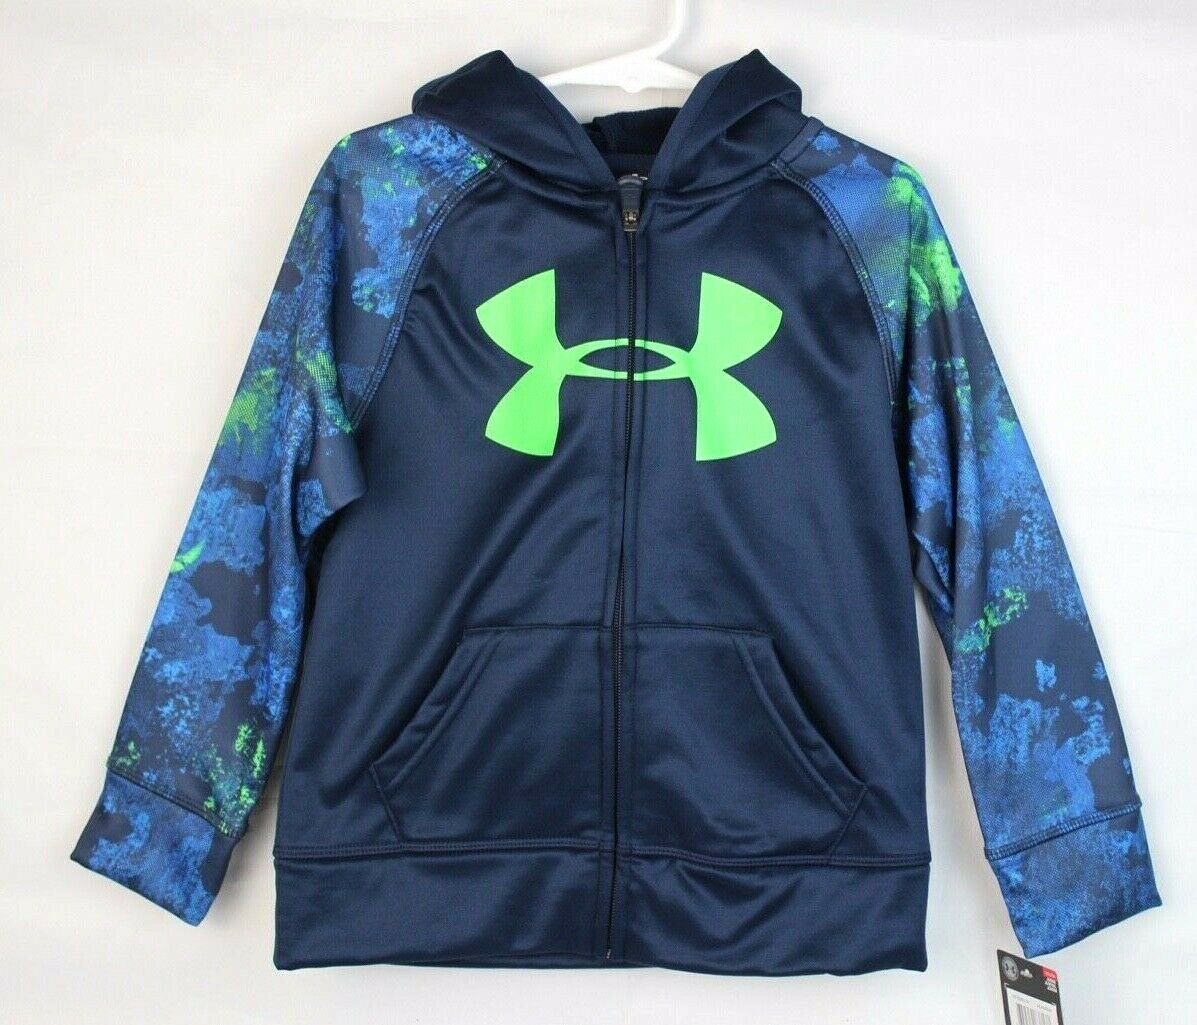 toddler under armour long sleeve